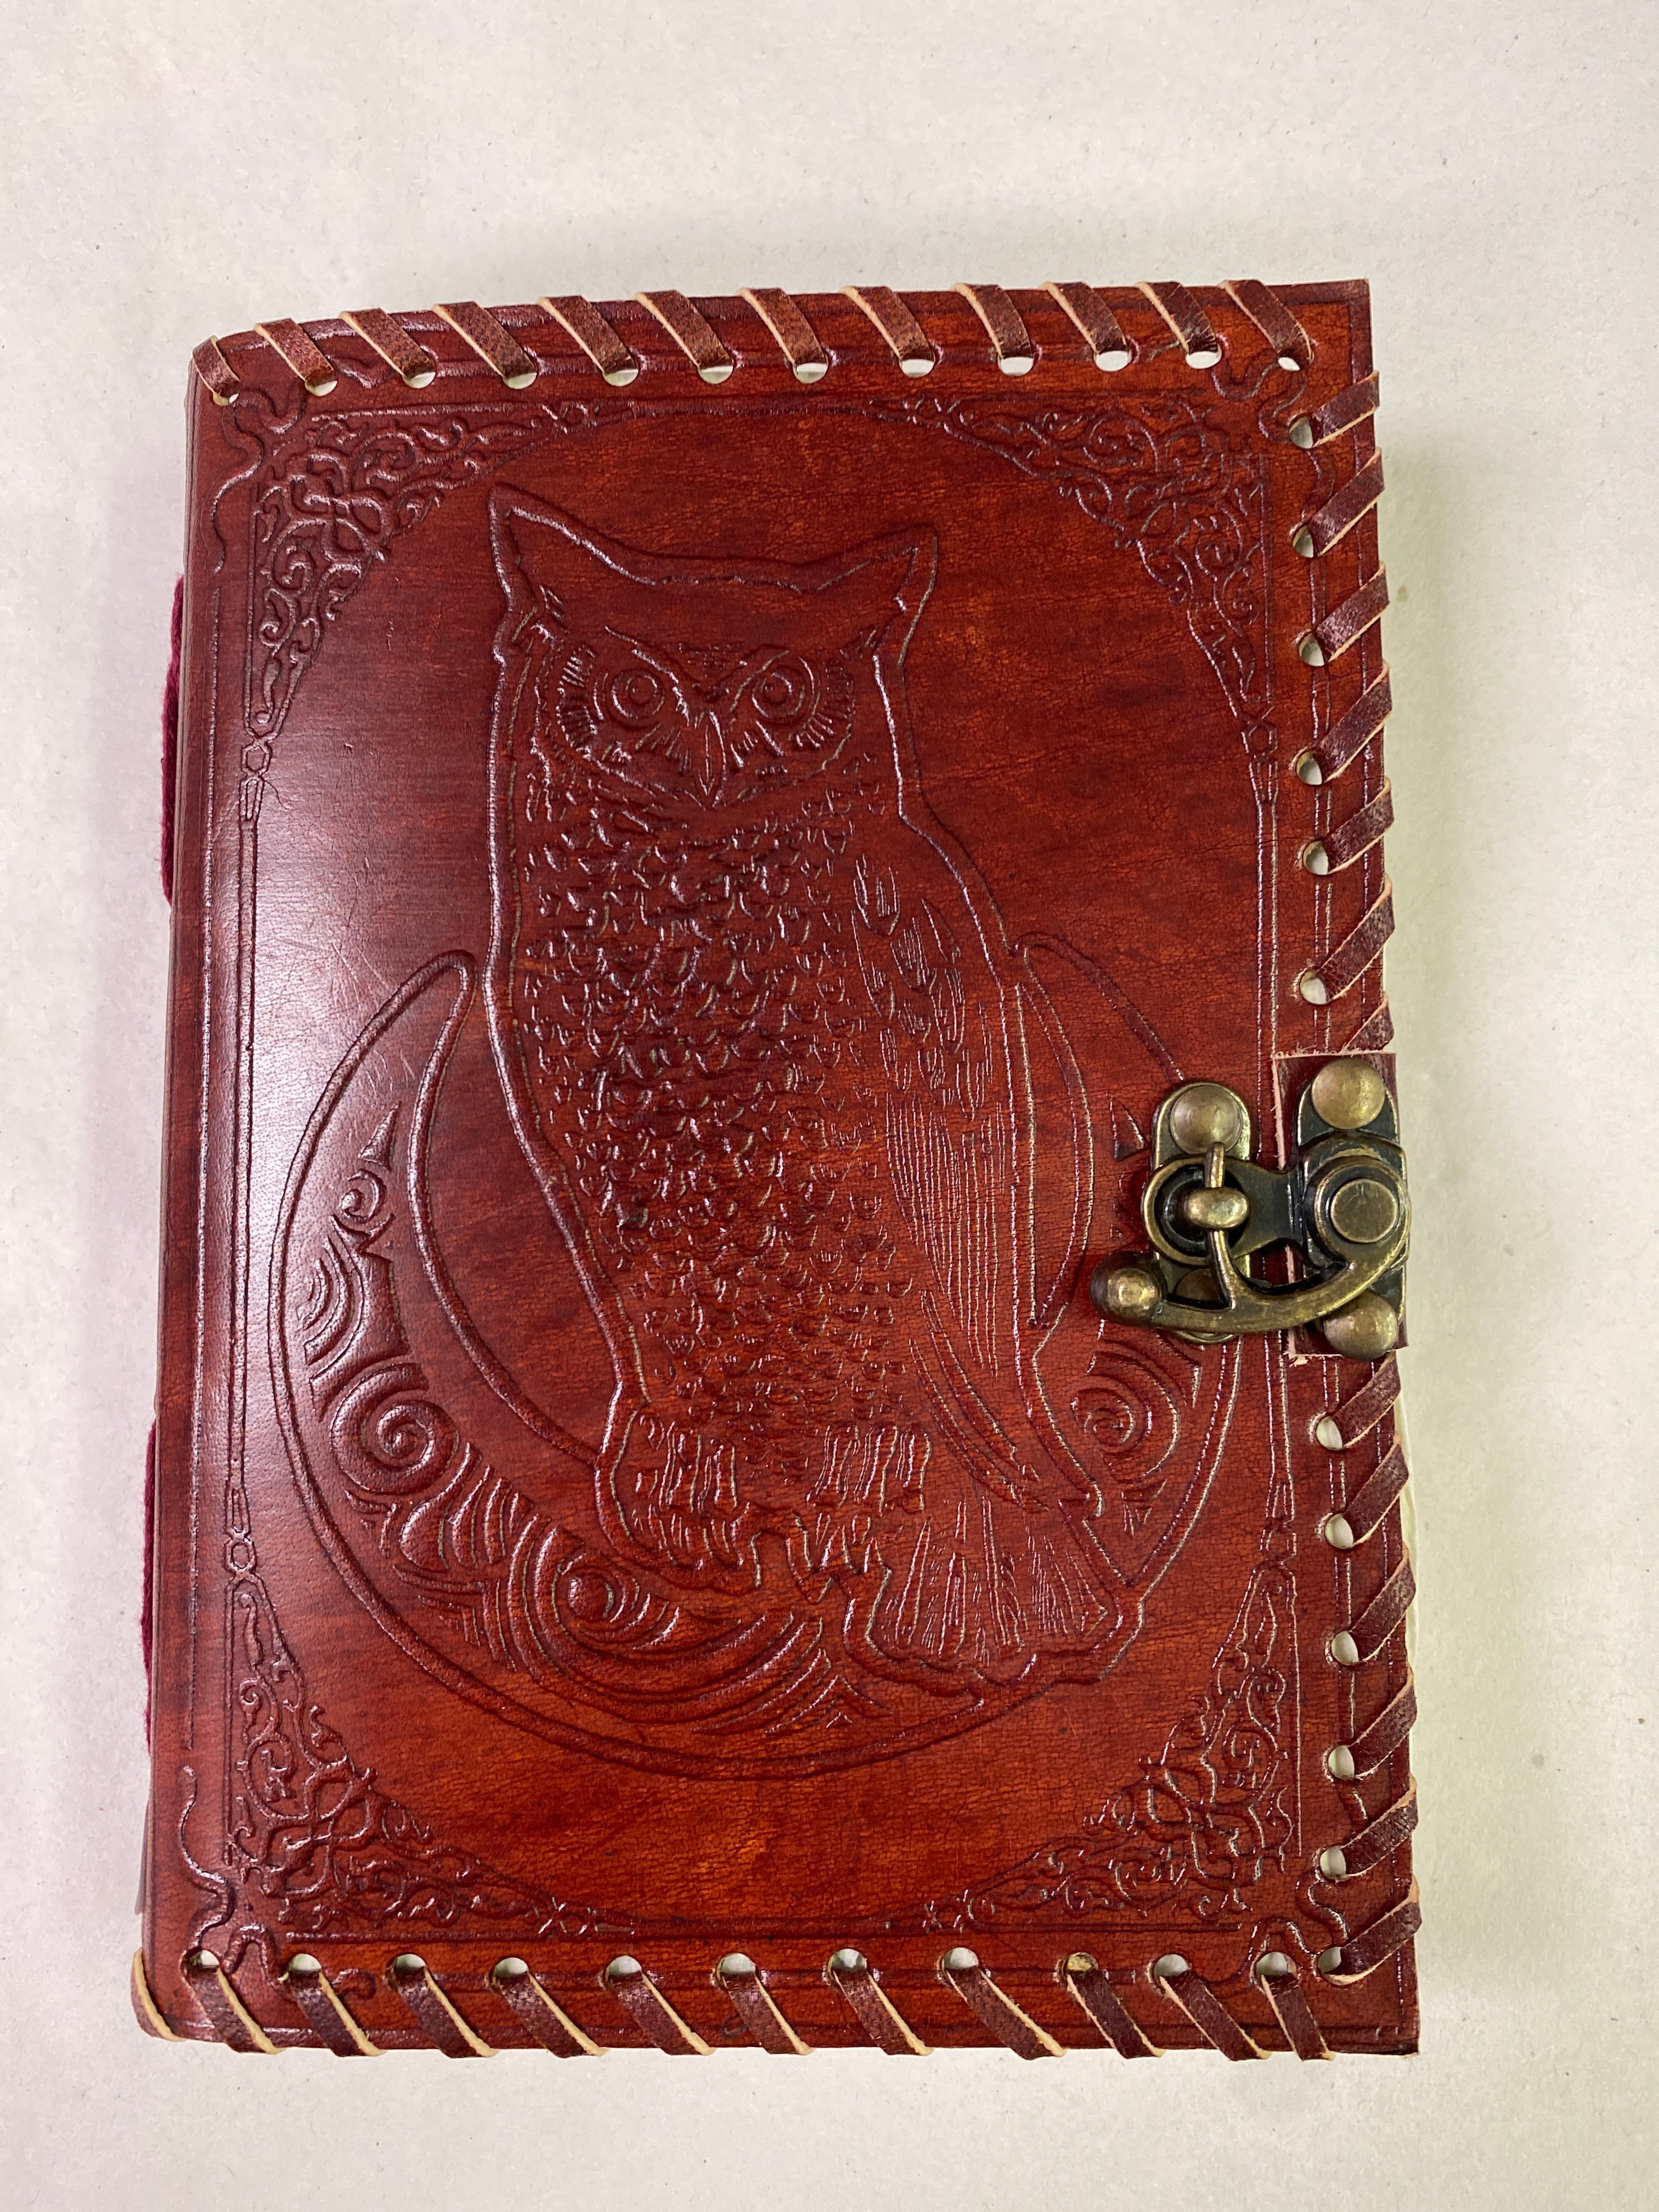 Owl Leather Journal